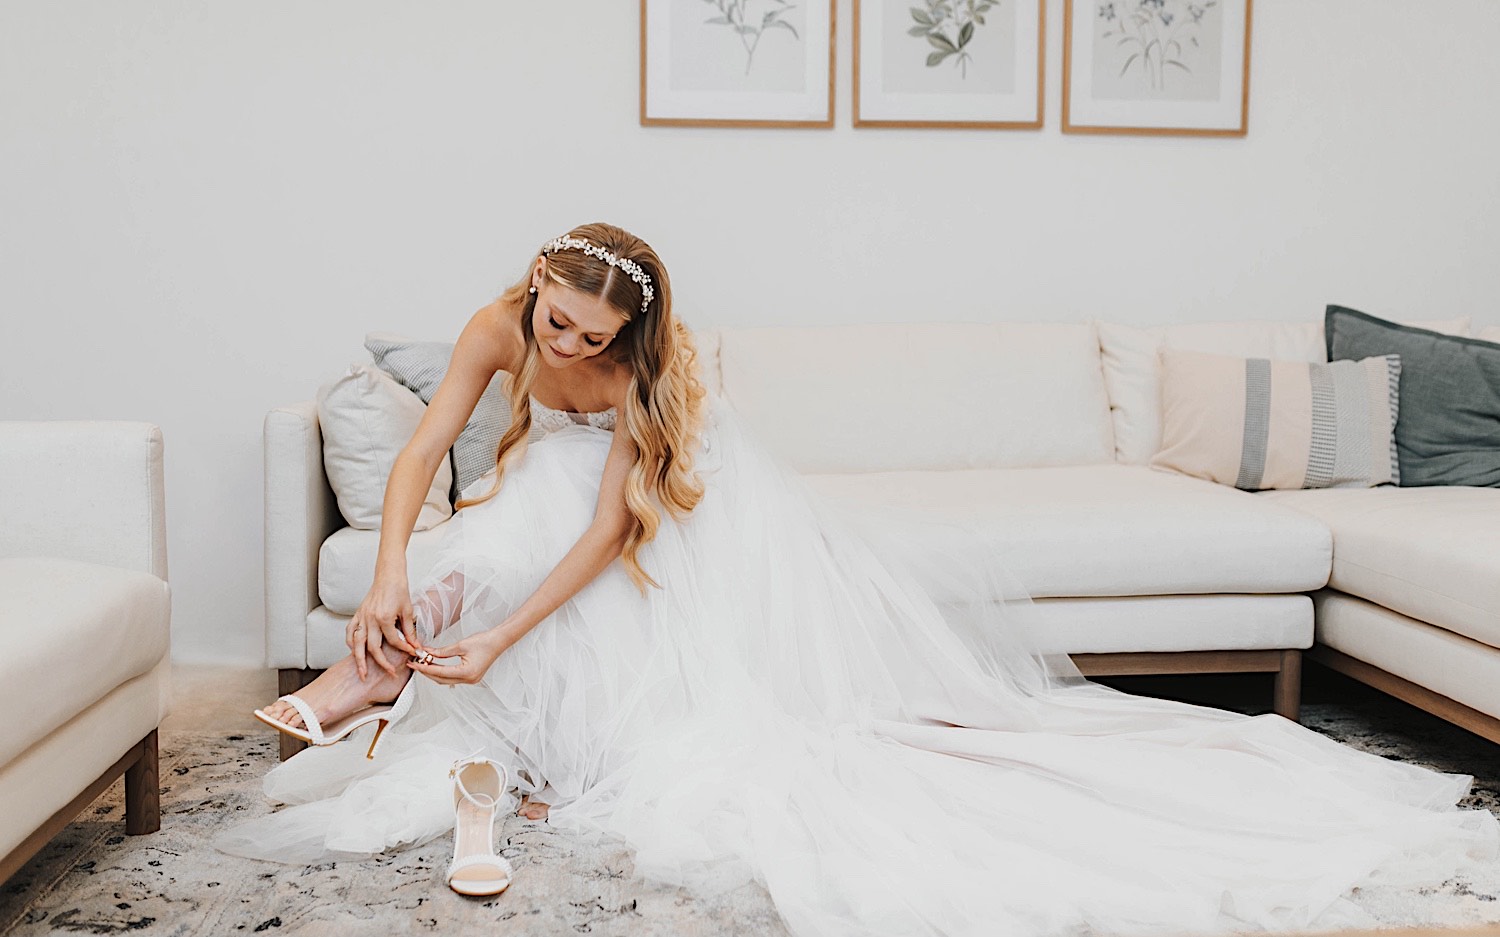 A bride sits on a couch and puts on her shoes while getting ready for her wedding day at The Aisling